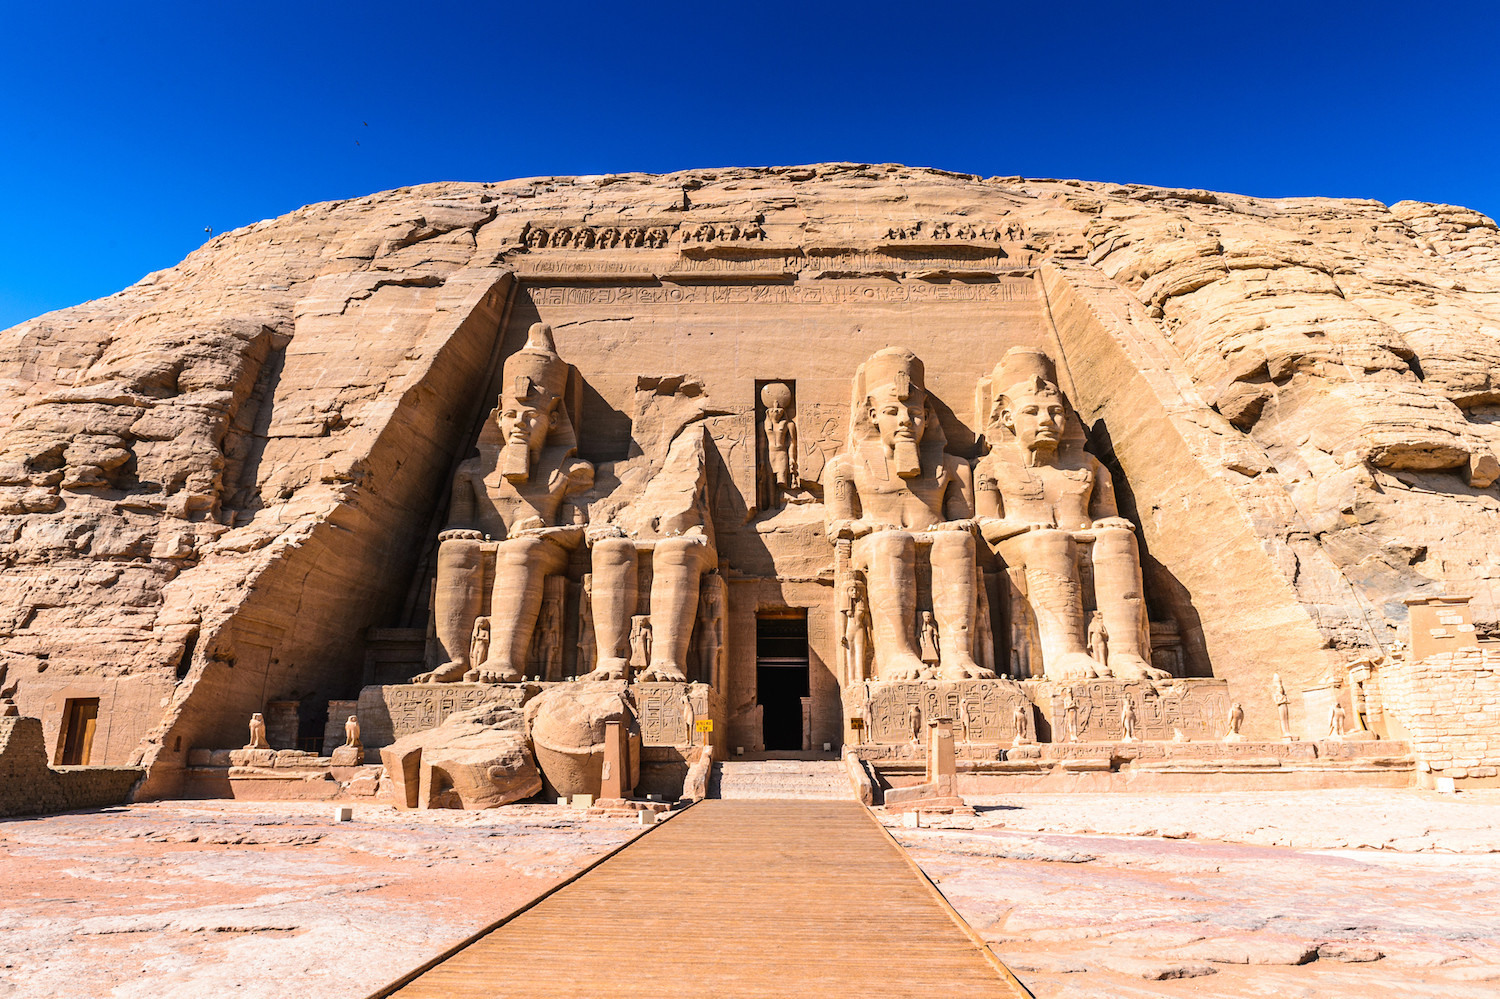 <p><span><span><span><span><span><span>During his reign in the 13th century BCE, Pharoah Ramses II commissioned Amu Simbel to create this monument. Cut from the rocky hillside, it features four gigantic statues of Ramesses II that flank the entrance. Abu Simbel was strategically placed so sunlight would enter the inner chamber twice yearly on each equinox. An earthquake caused the damage shown in the photo.</span></span></span></span></span></span></p>  <p><span><span><span><span><span><span>When the Aswan Dam was built in the 1960s and 70s, which created Lake Nasser, water would have covered the ruins in their original location. Therefore, archeologists moved the Abu Simbel temples to a higher spot known as the UNESCO Nubian Monuments. Despite the move, they did not reconstruct the damaged statue, preferring to leave the broken pieces just as they had fallen.</span></span></span></span></span></span></p>